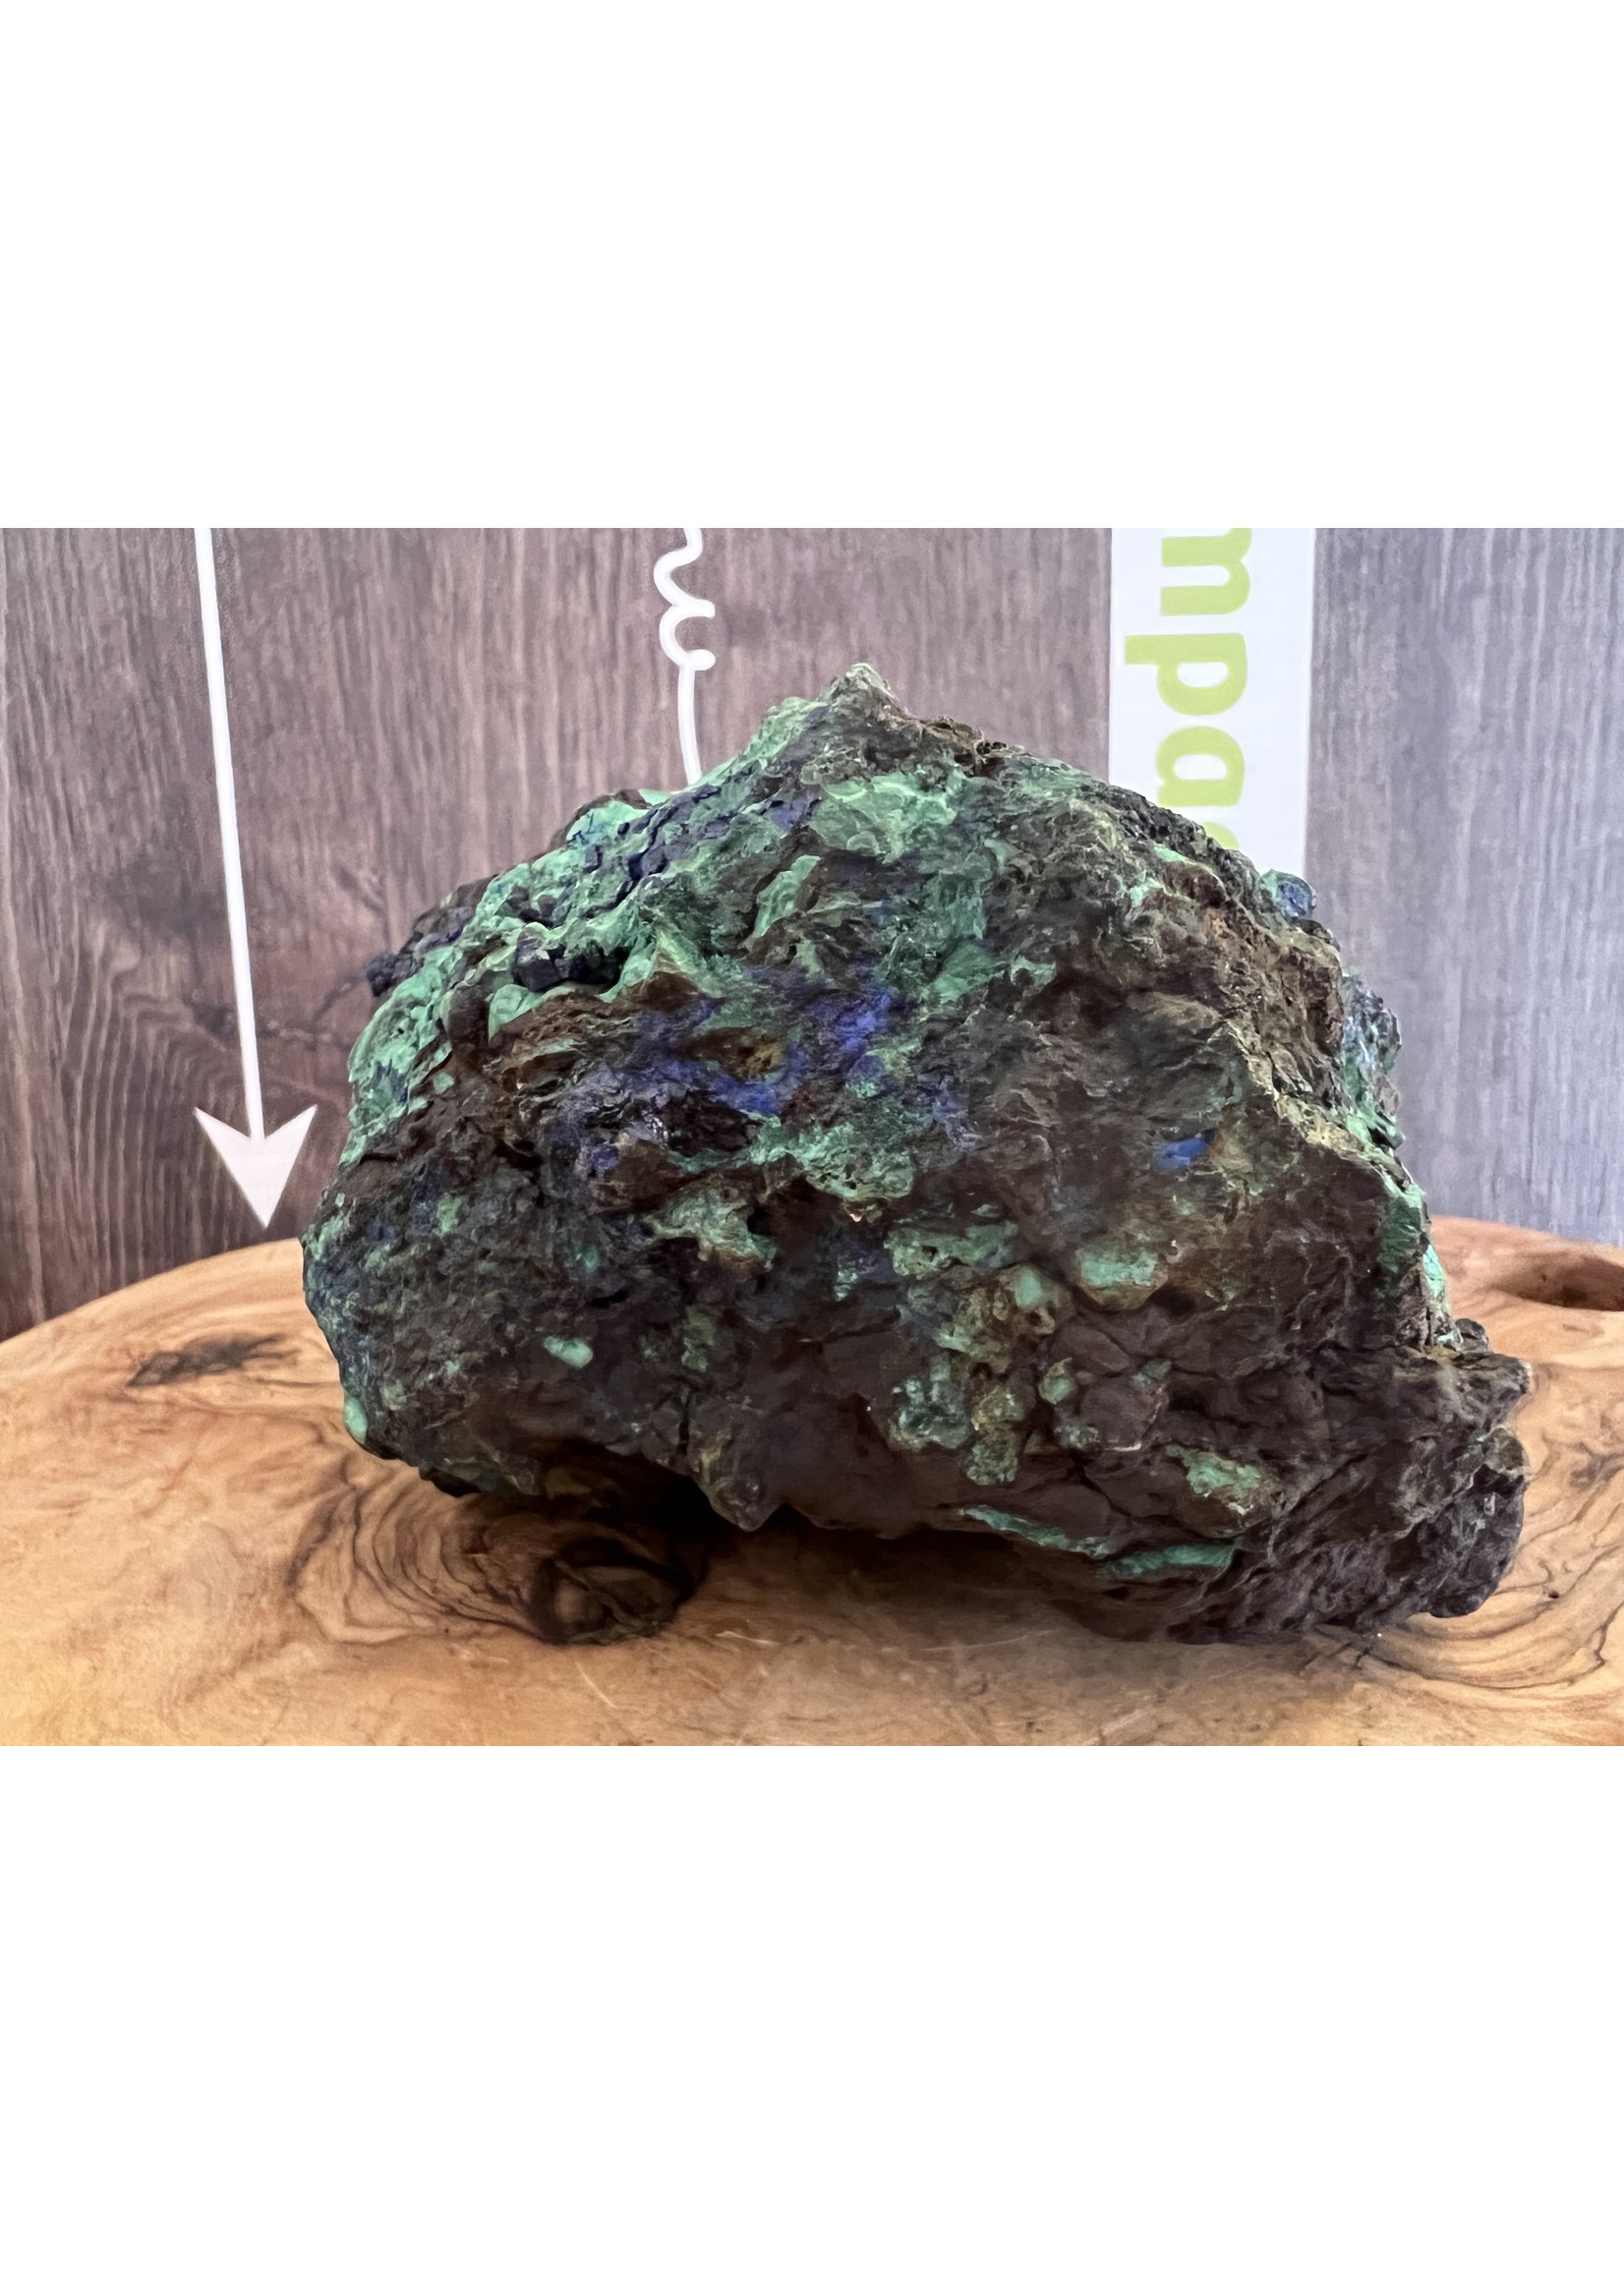 extra large azurite malachite shimmering specimen, helps all of our body systems work together